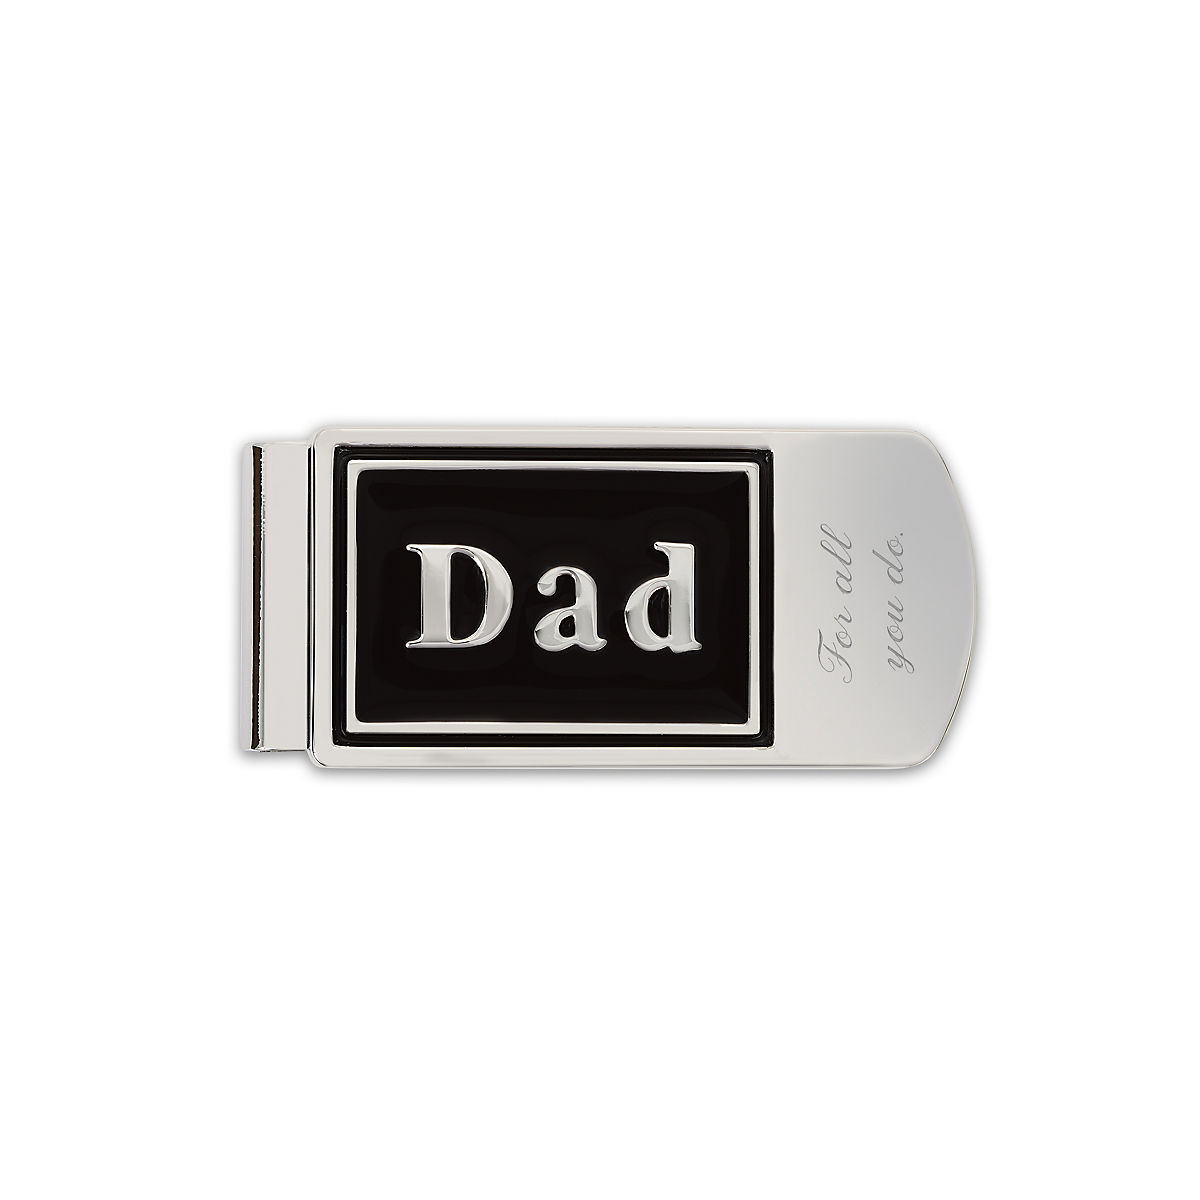 CHEERYMAGIC Money Clip for Dad Stainless Steel Cash Clip Father Money Clip Father's Day Gifts from Daughter A2KZQJ